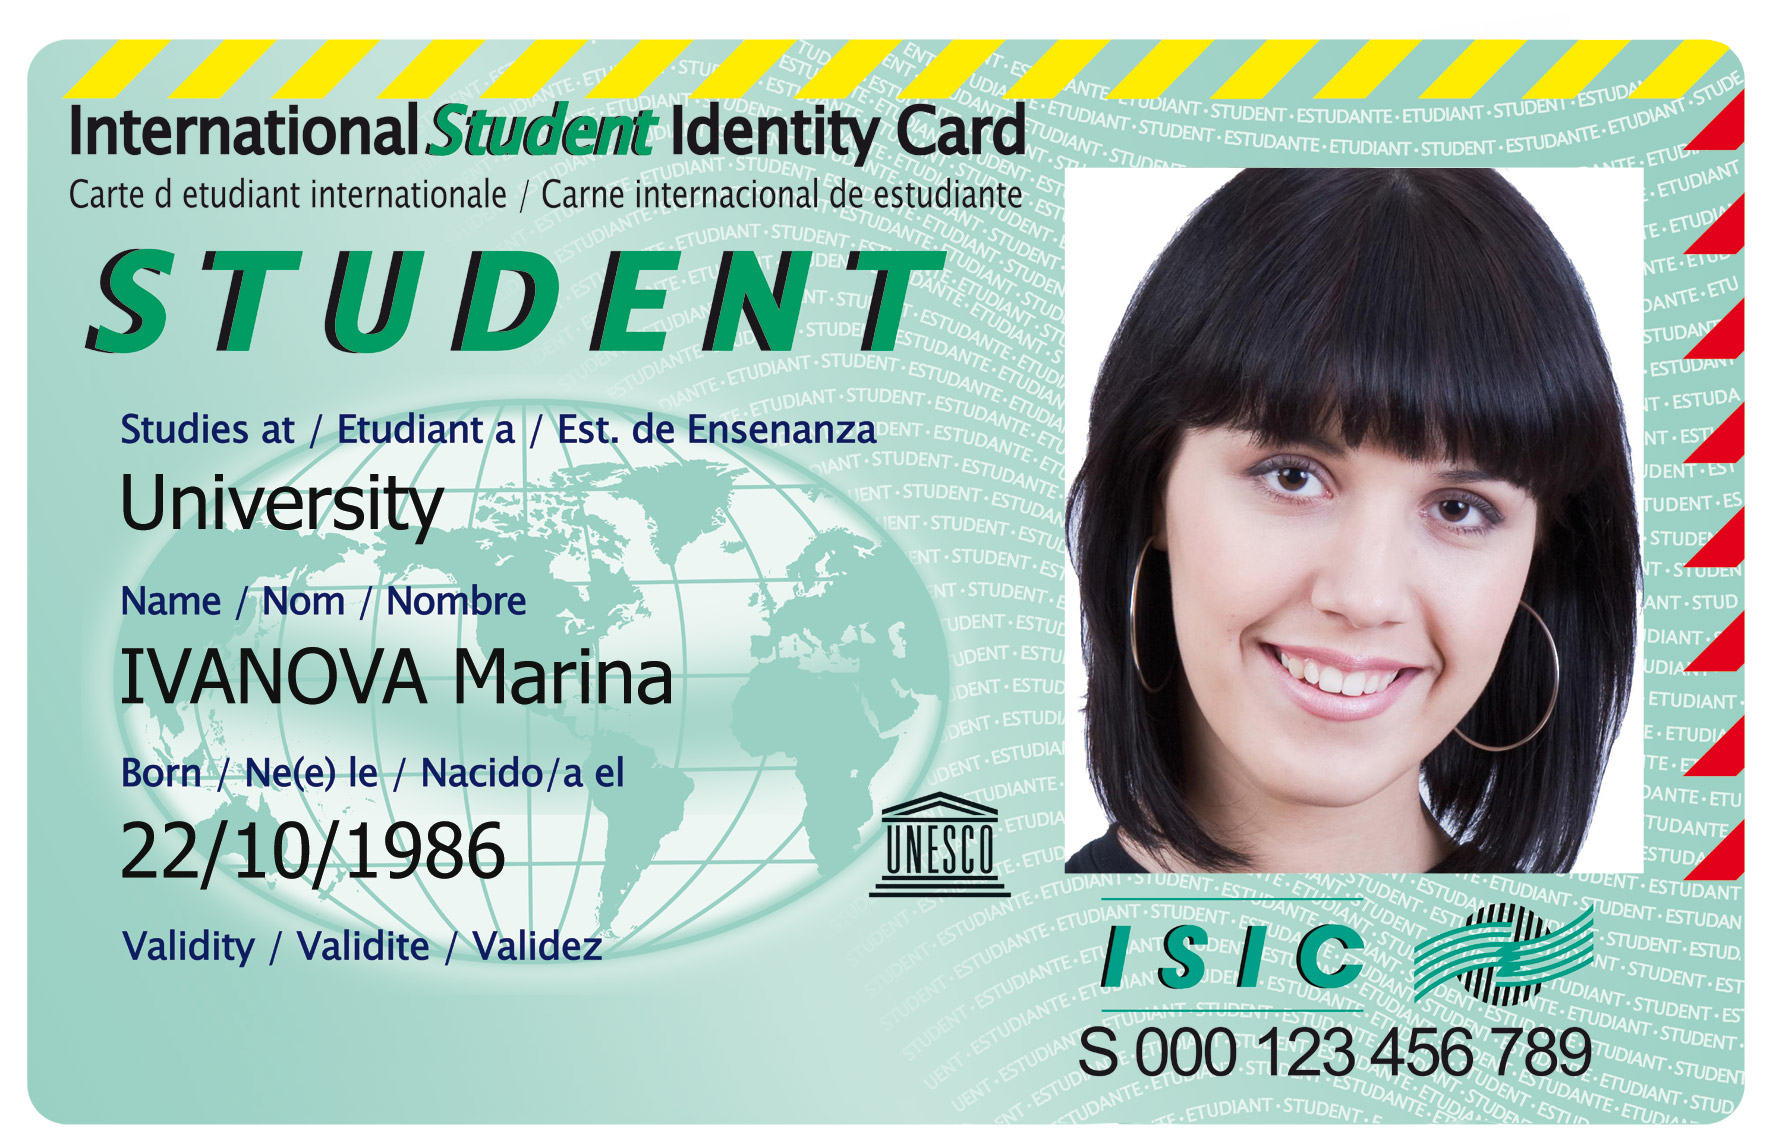 Another id. Карта ISIC. ID Card. Identity Card. Student Identity Card.